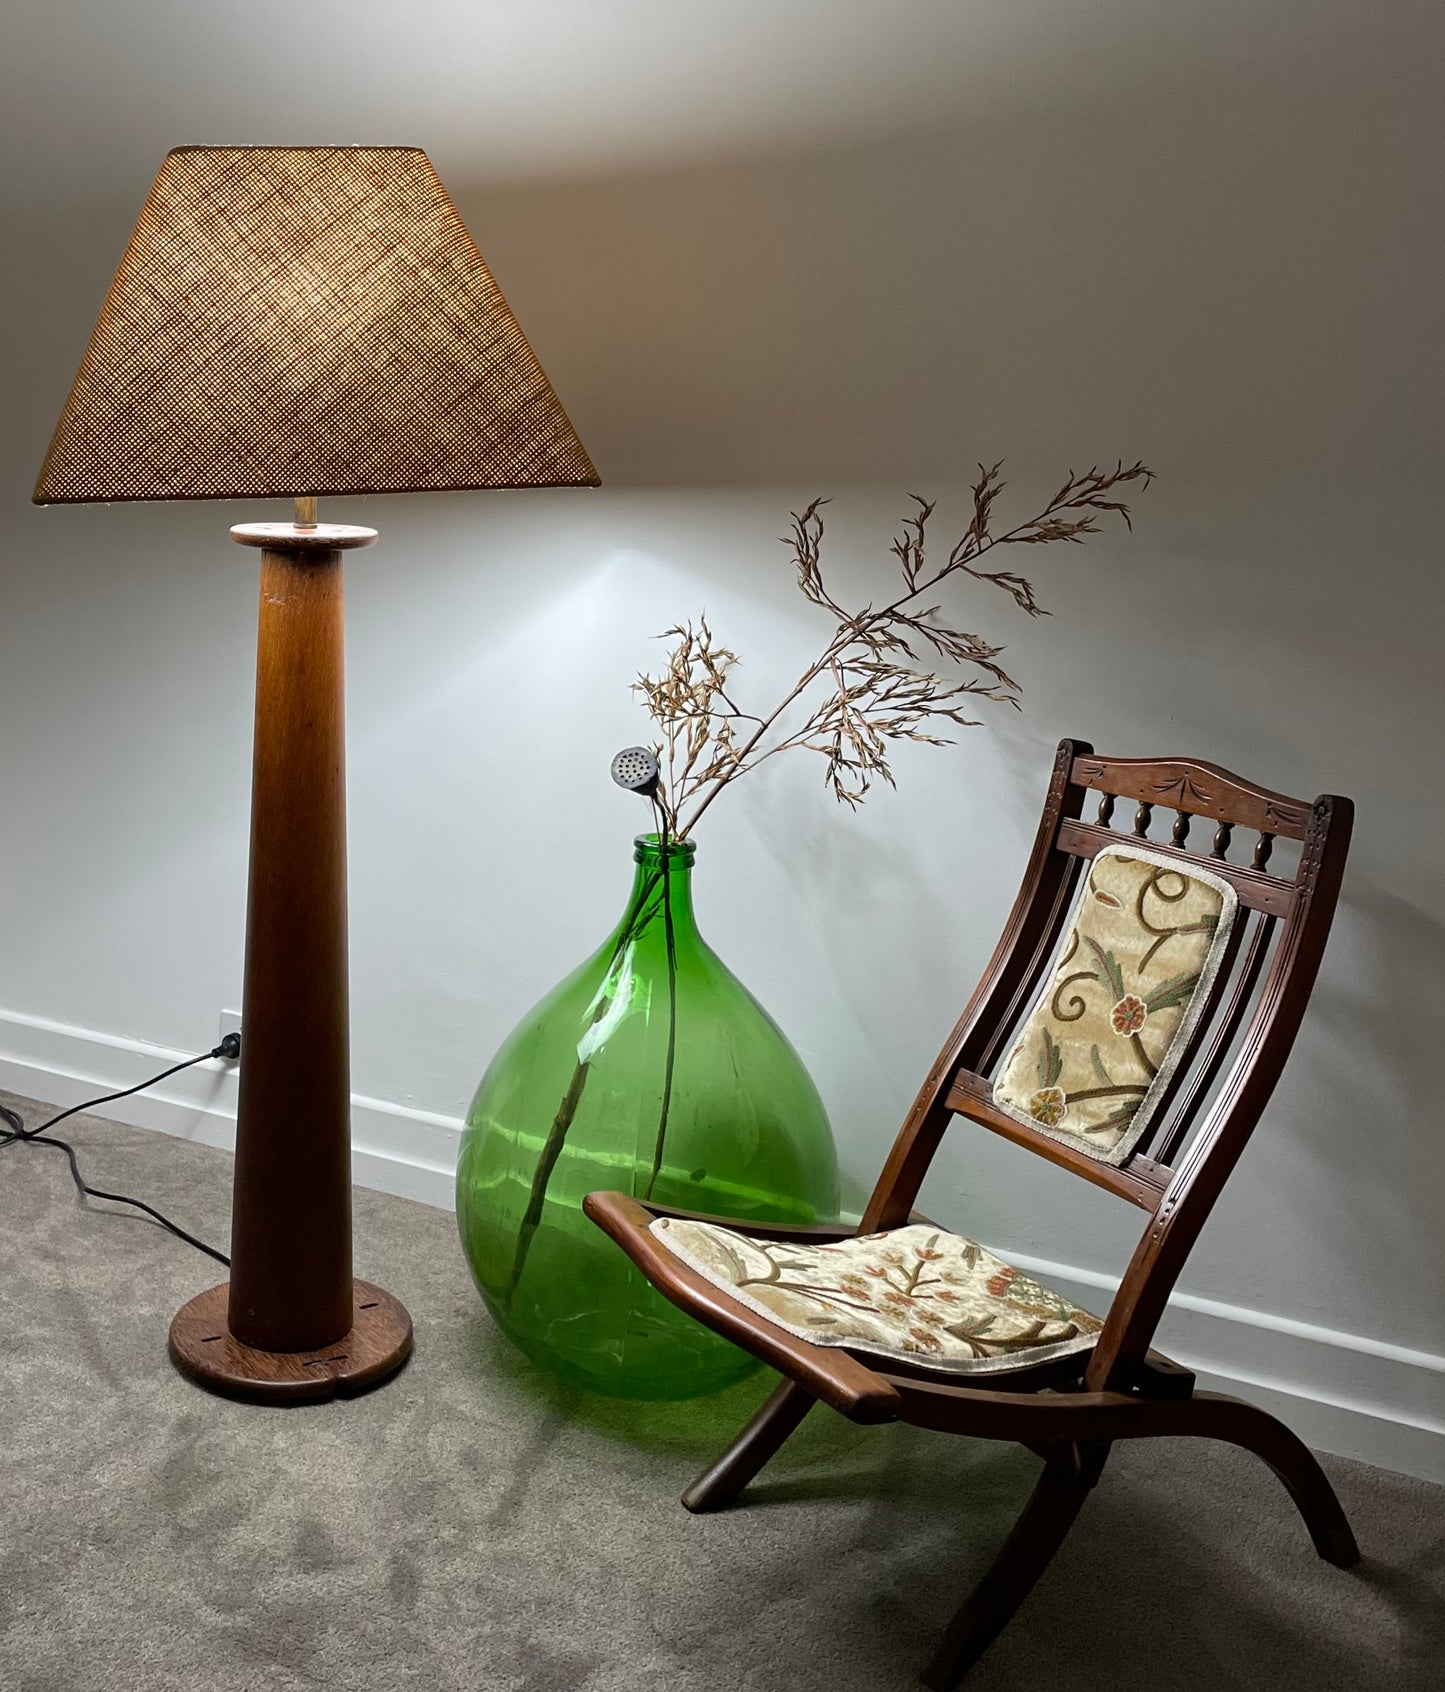 - Pacific Green Floor Lamp with Textured Hessian Shade